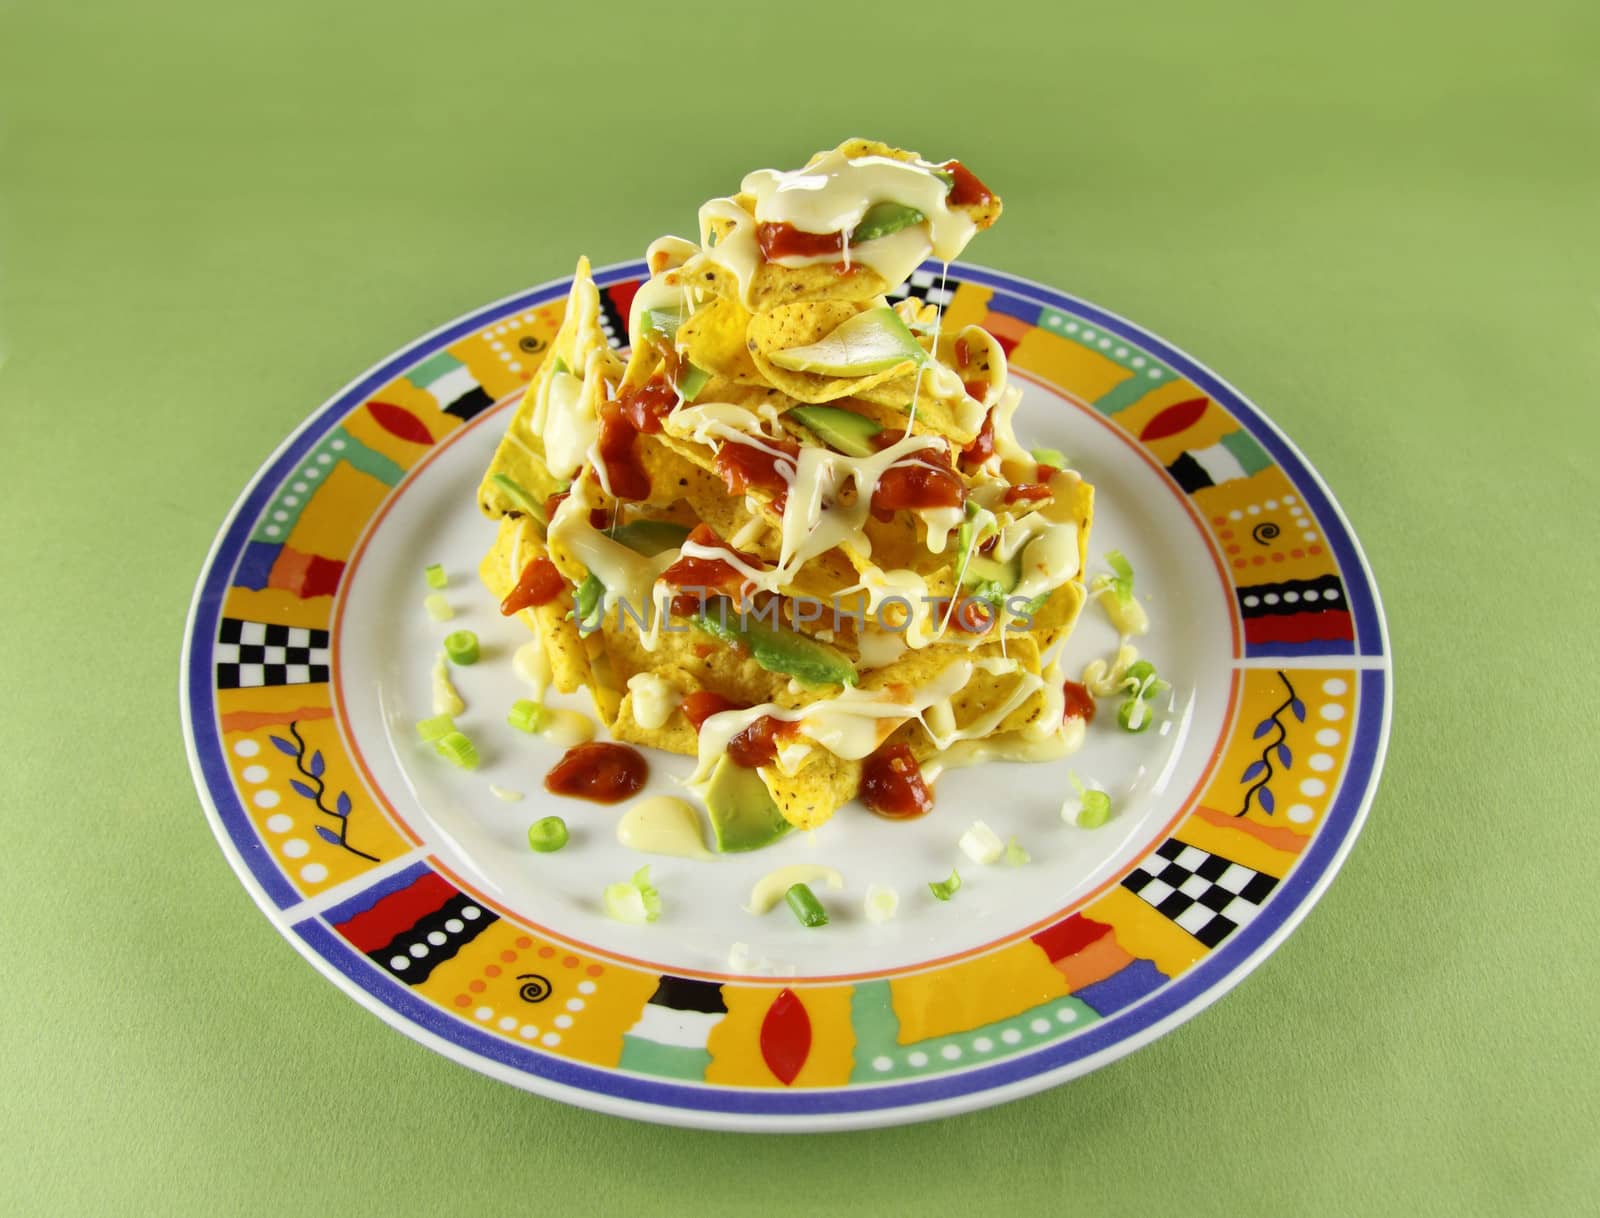 Delicious stack of nachos with guacamole and melted cheese.